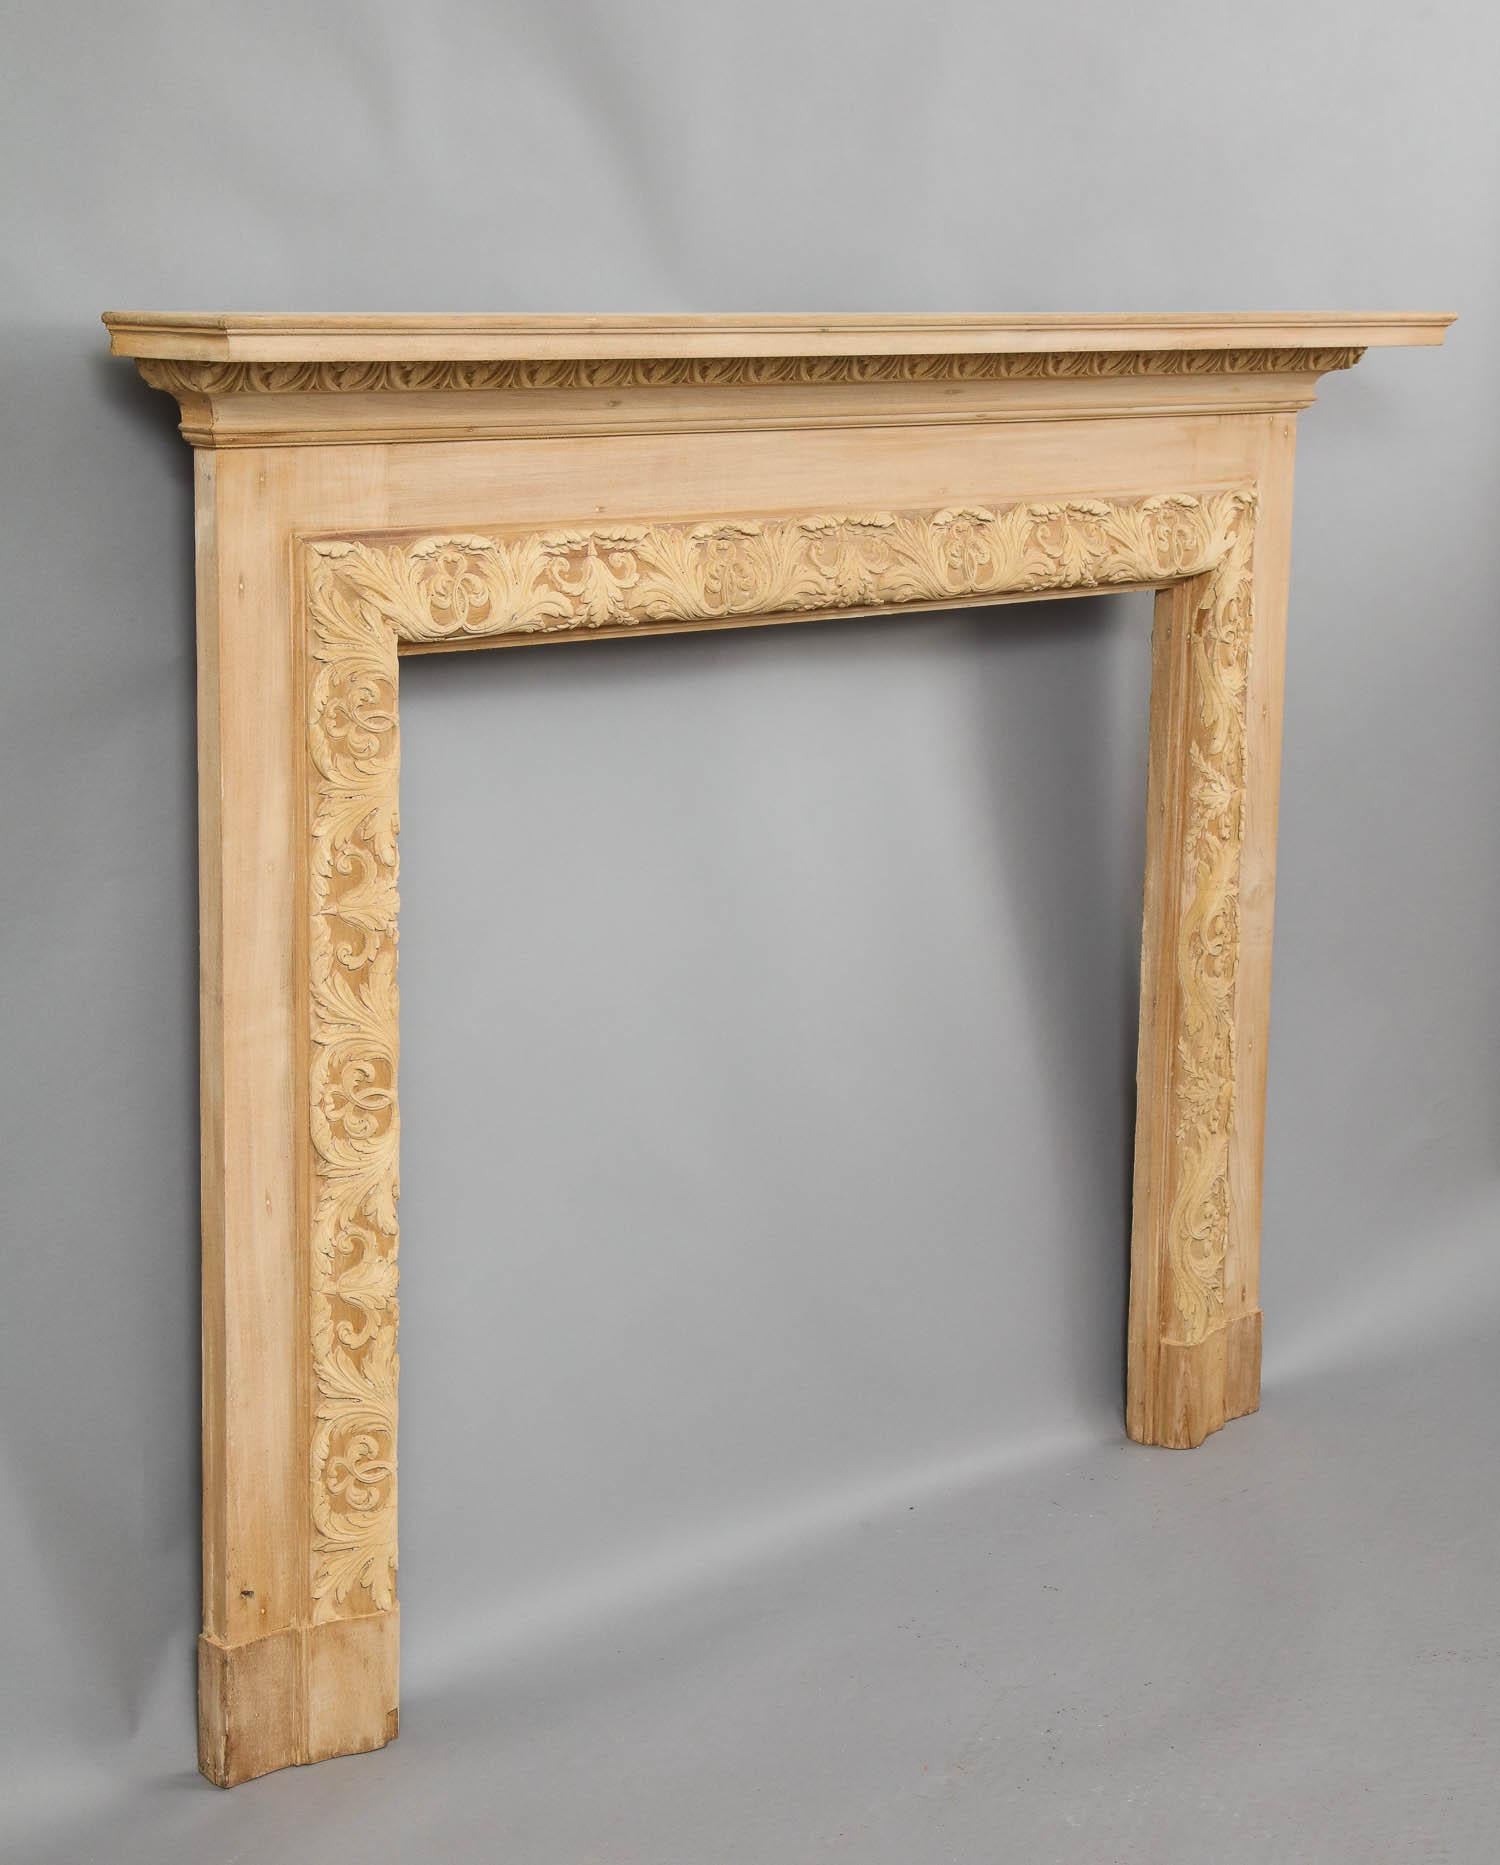 Very fine early 20th century Georgian style mantel, having floral carved egg and dart molding over bolection molded opening having applied composition decoration with foliate sprays and scrolls, now stripped. Removed from a prominent Westchester